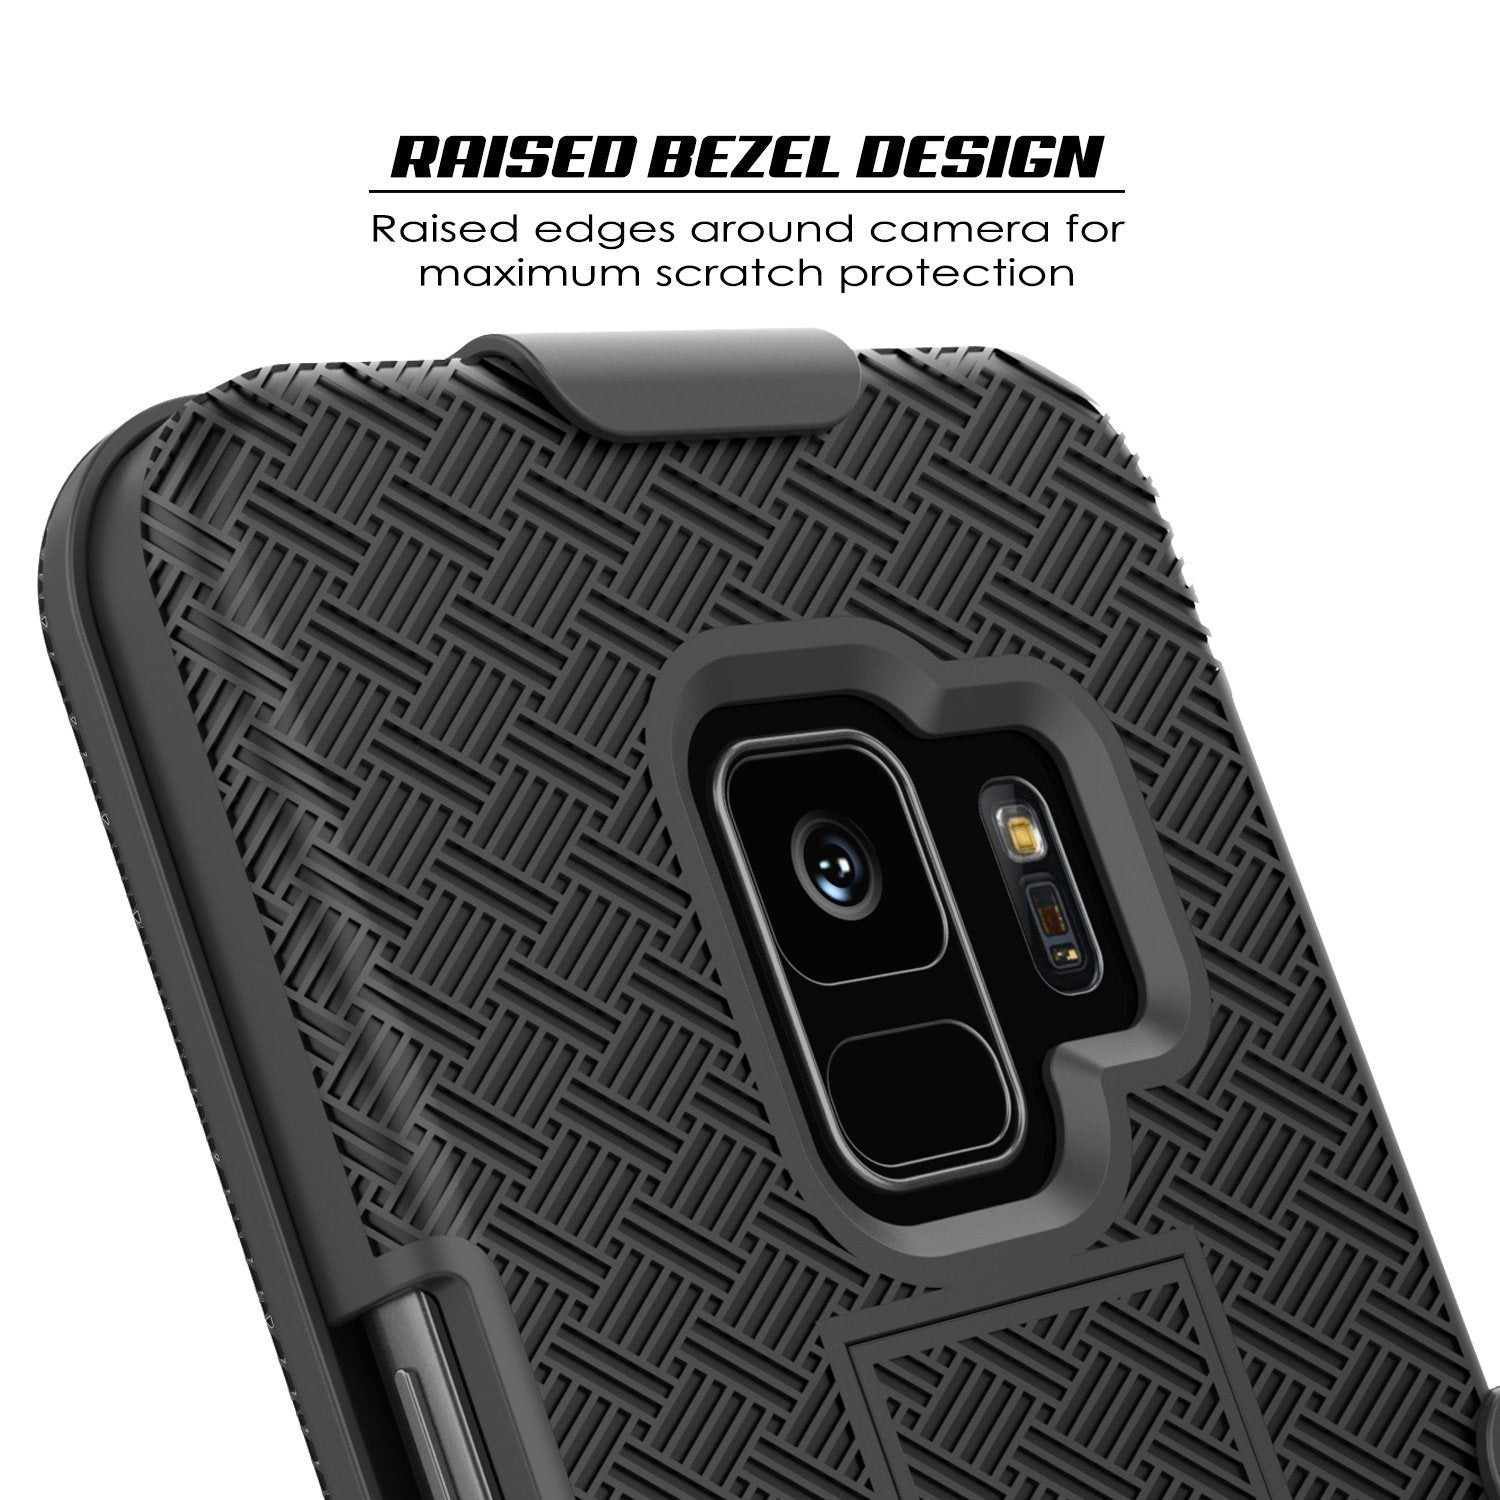 Punkcase Galaxy S9 Case With Screen Protector, Holster Belt Clip & Built-In Kickstand Non Slip Dual Layer Hybrid TPU Full Body Protection [Thin Fit] for Samsung Galaxy S9 Edge [Black] - PunkCase NZ